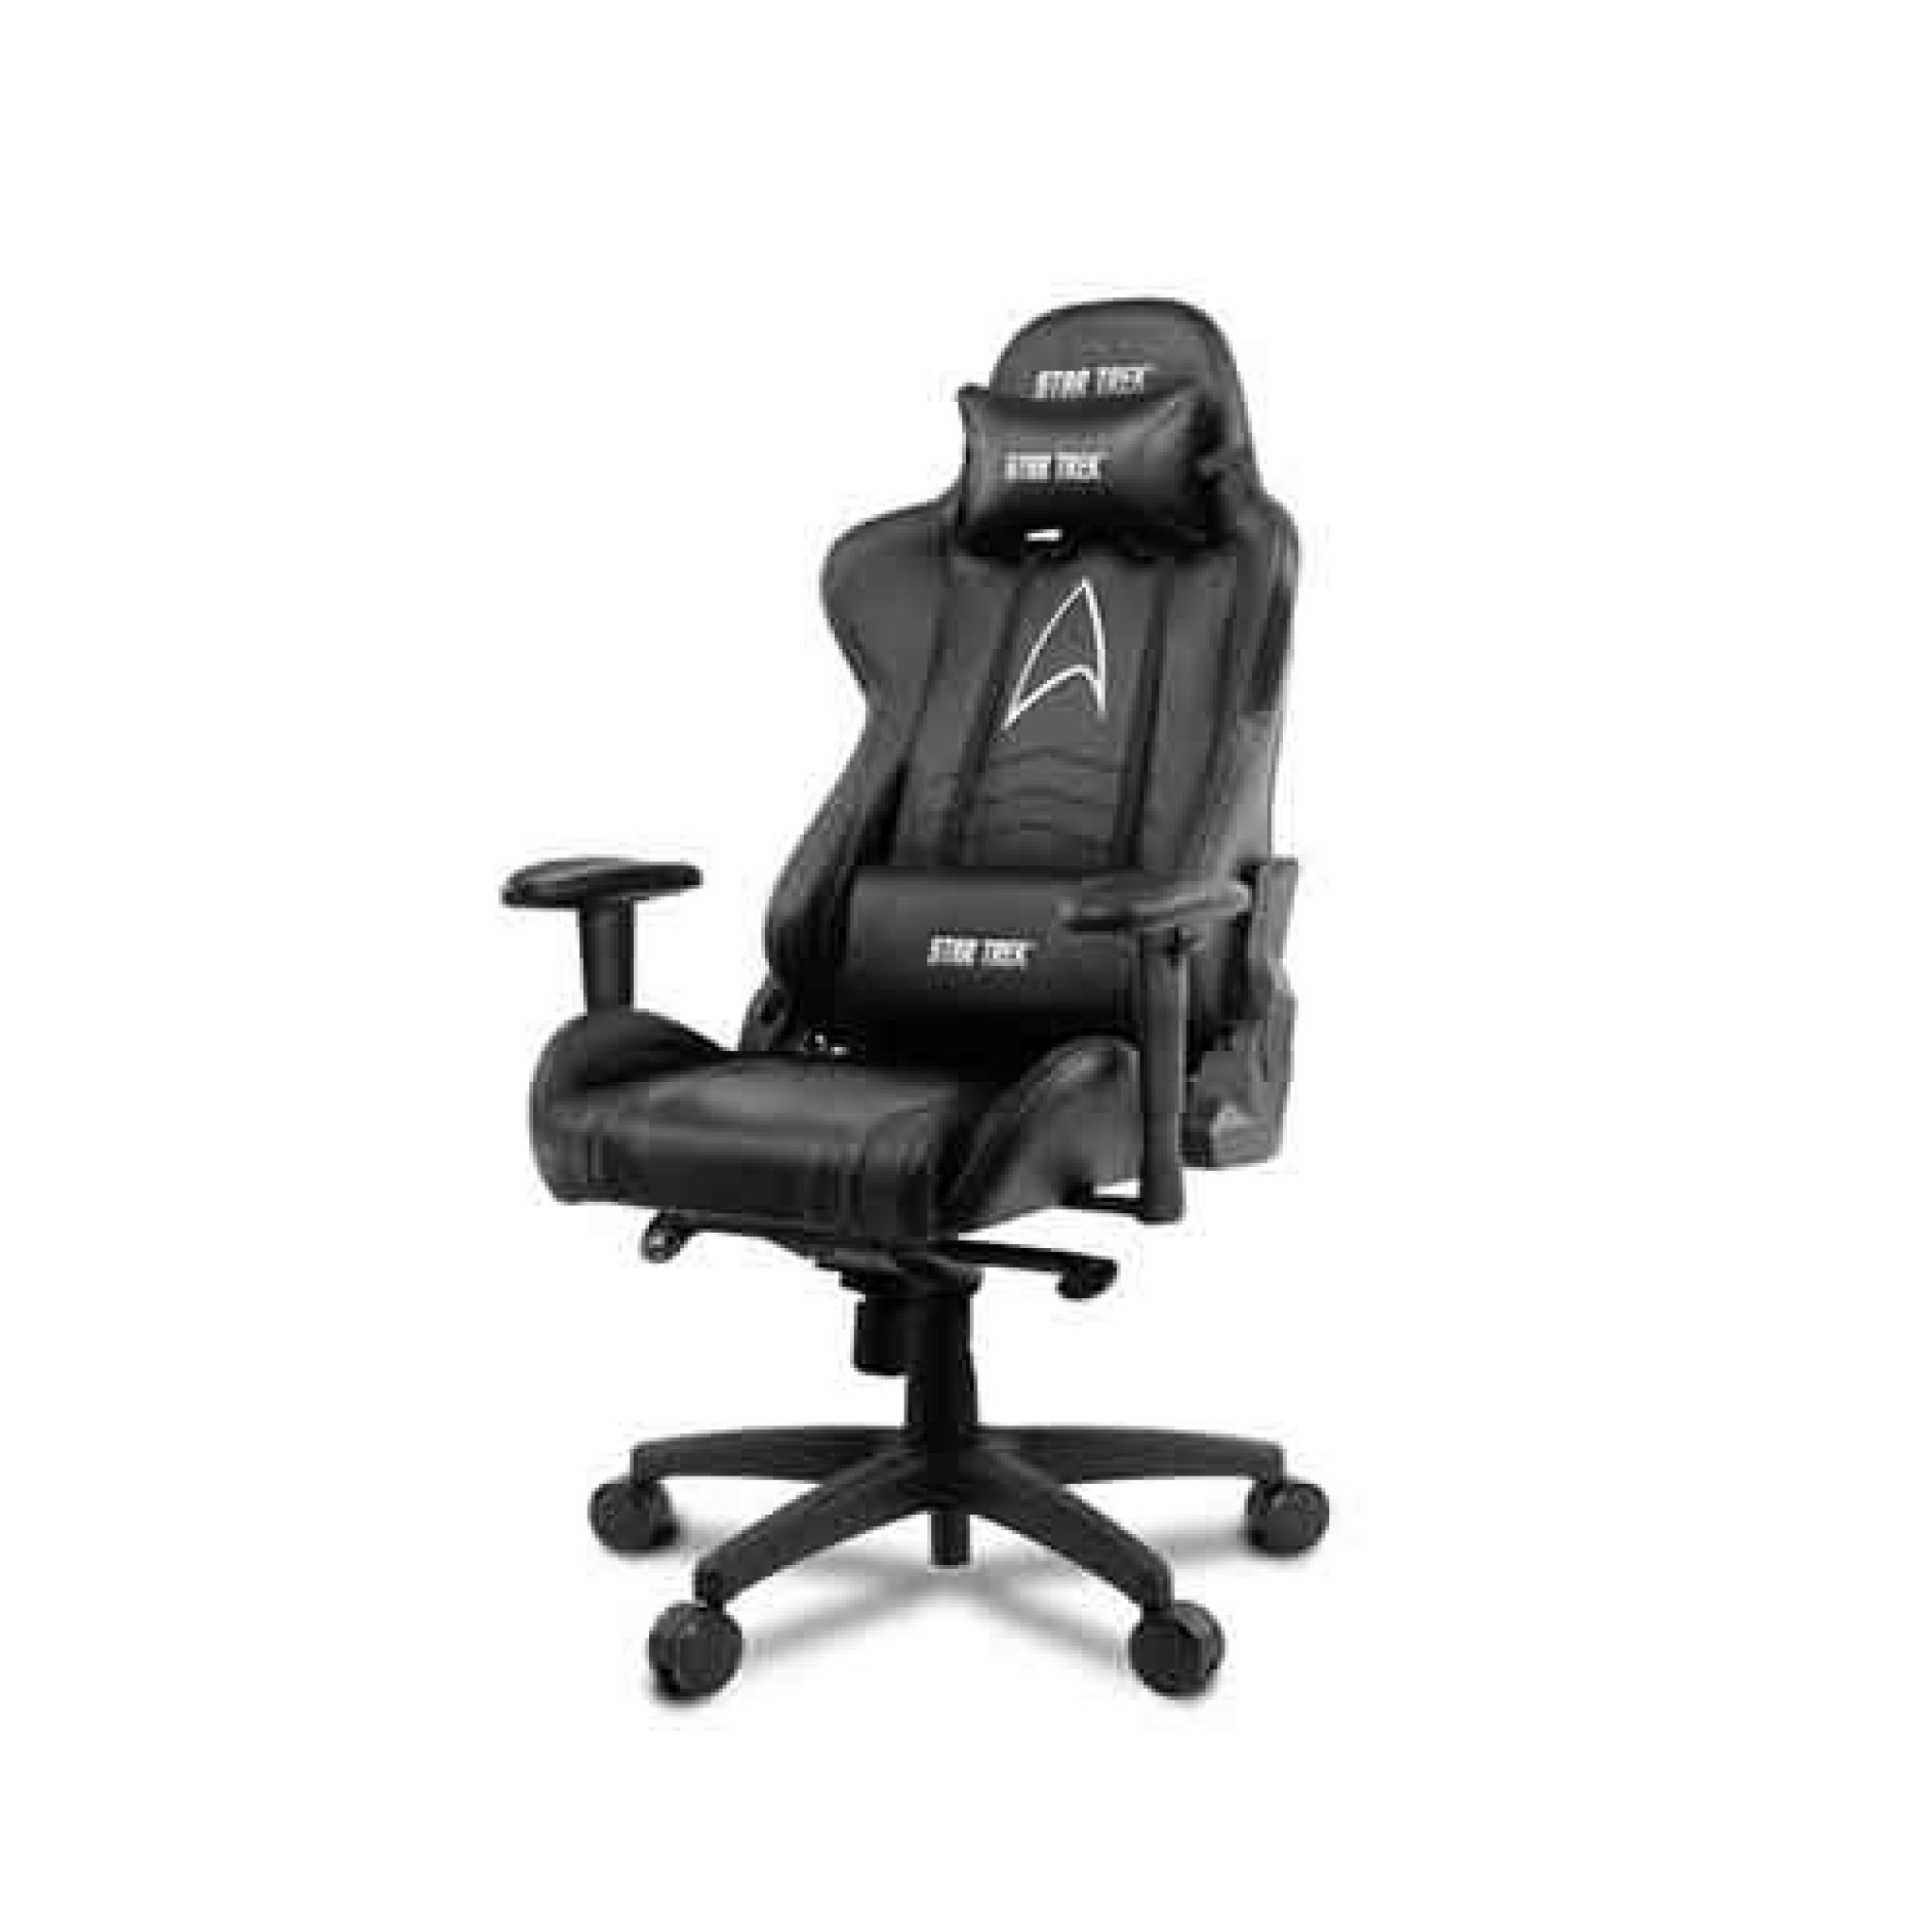 1st Player Gaming Chair Black/Yellow (S01) Price in Pakistan Compare